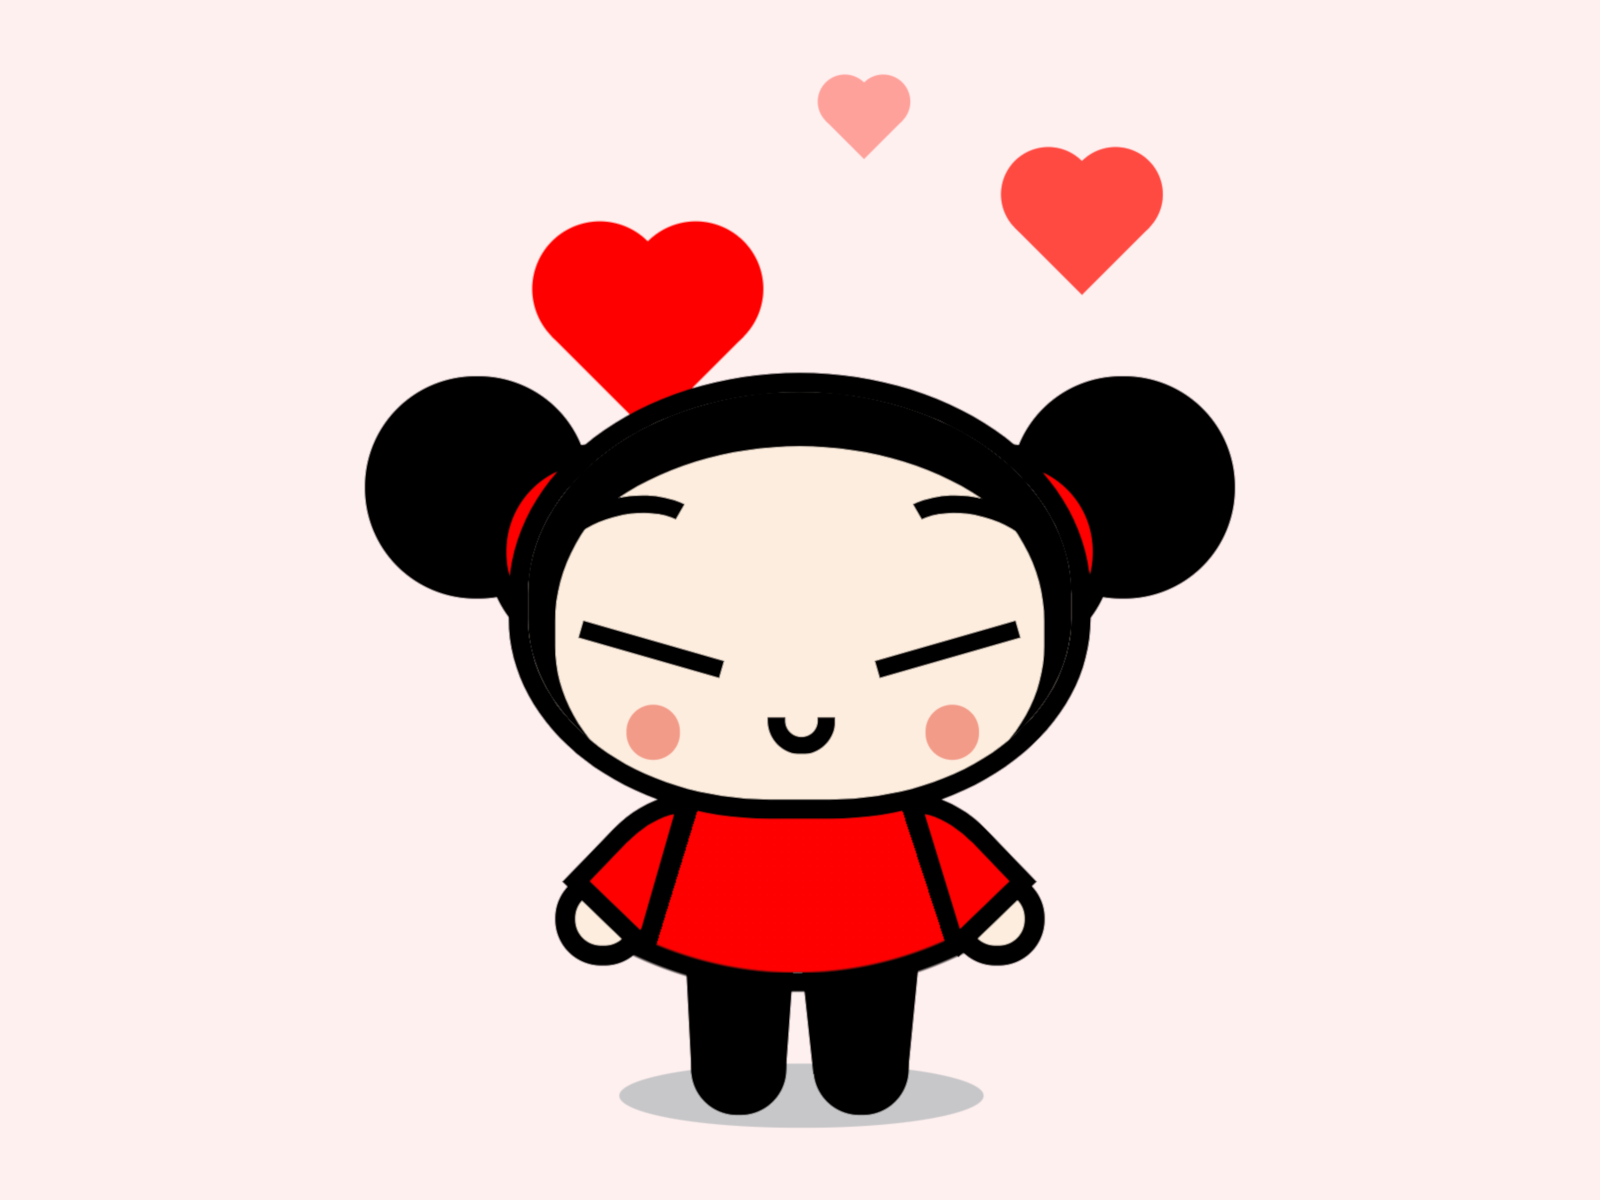 Illustration of the cartoon character Pucca